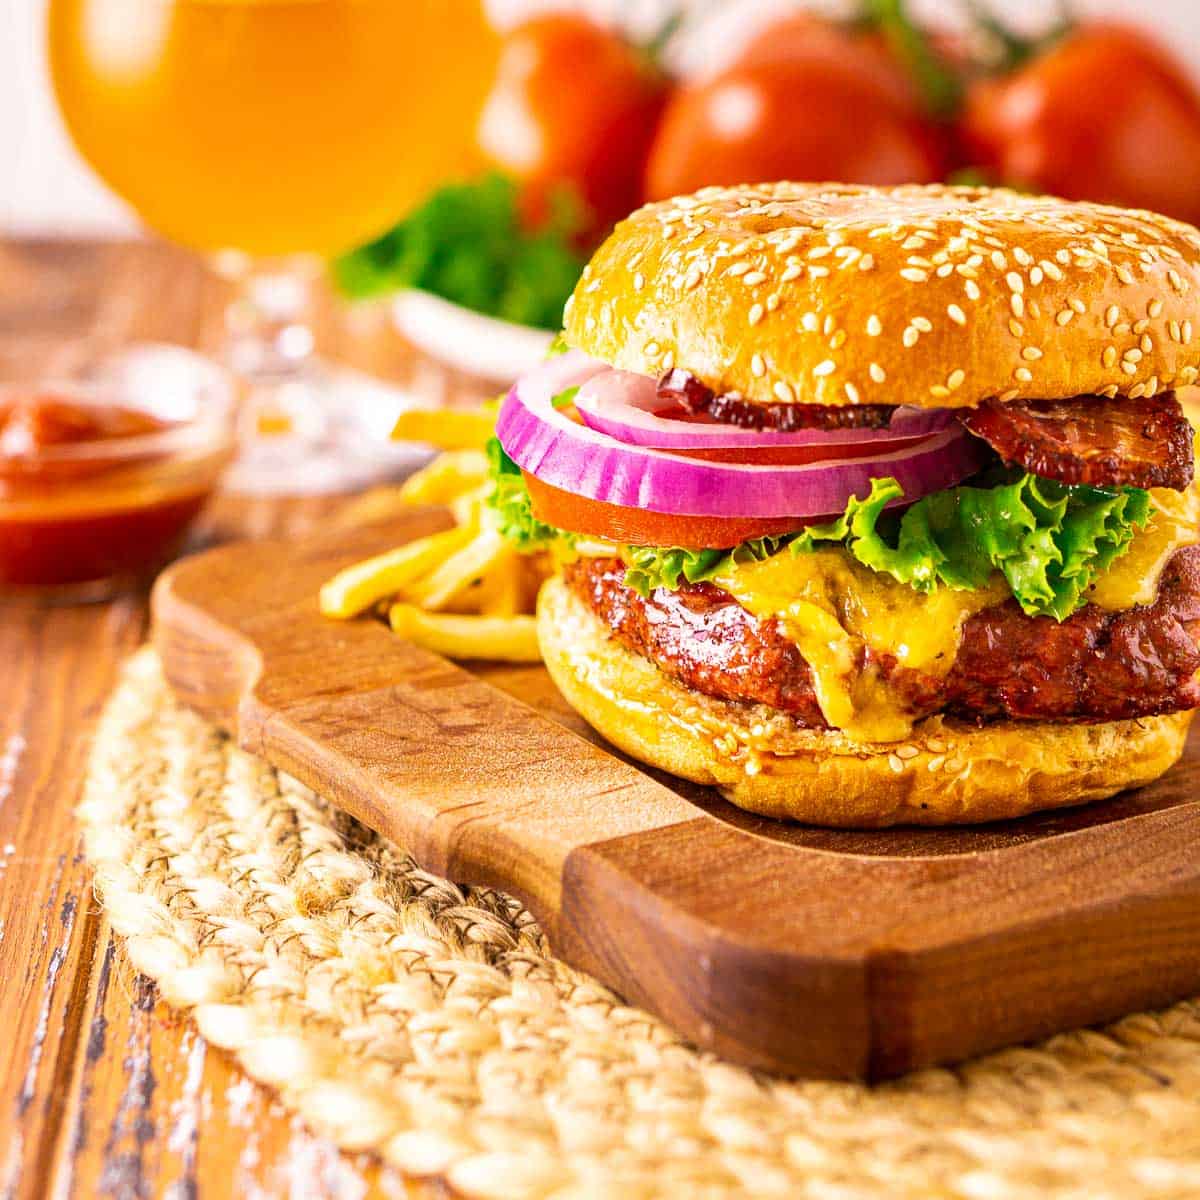 A smoked burger on a wooden tray with a beer in the background.